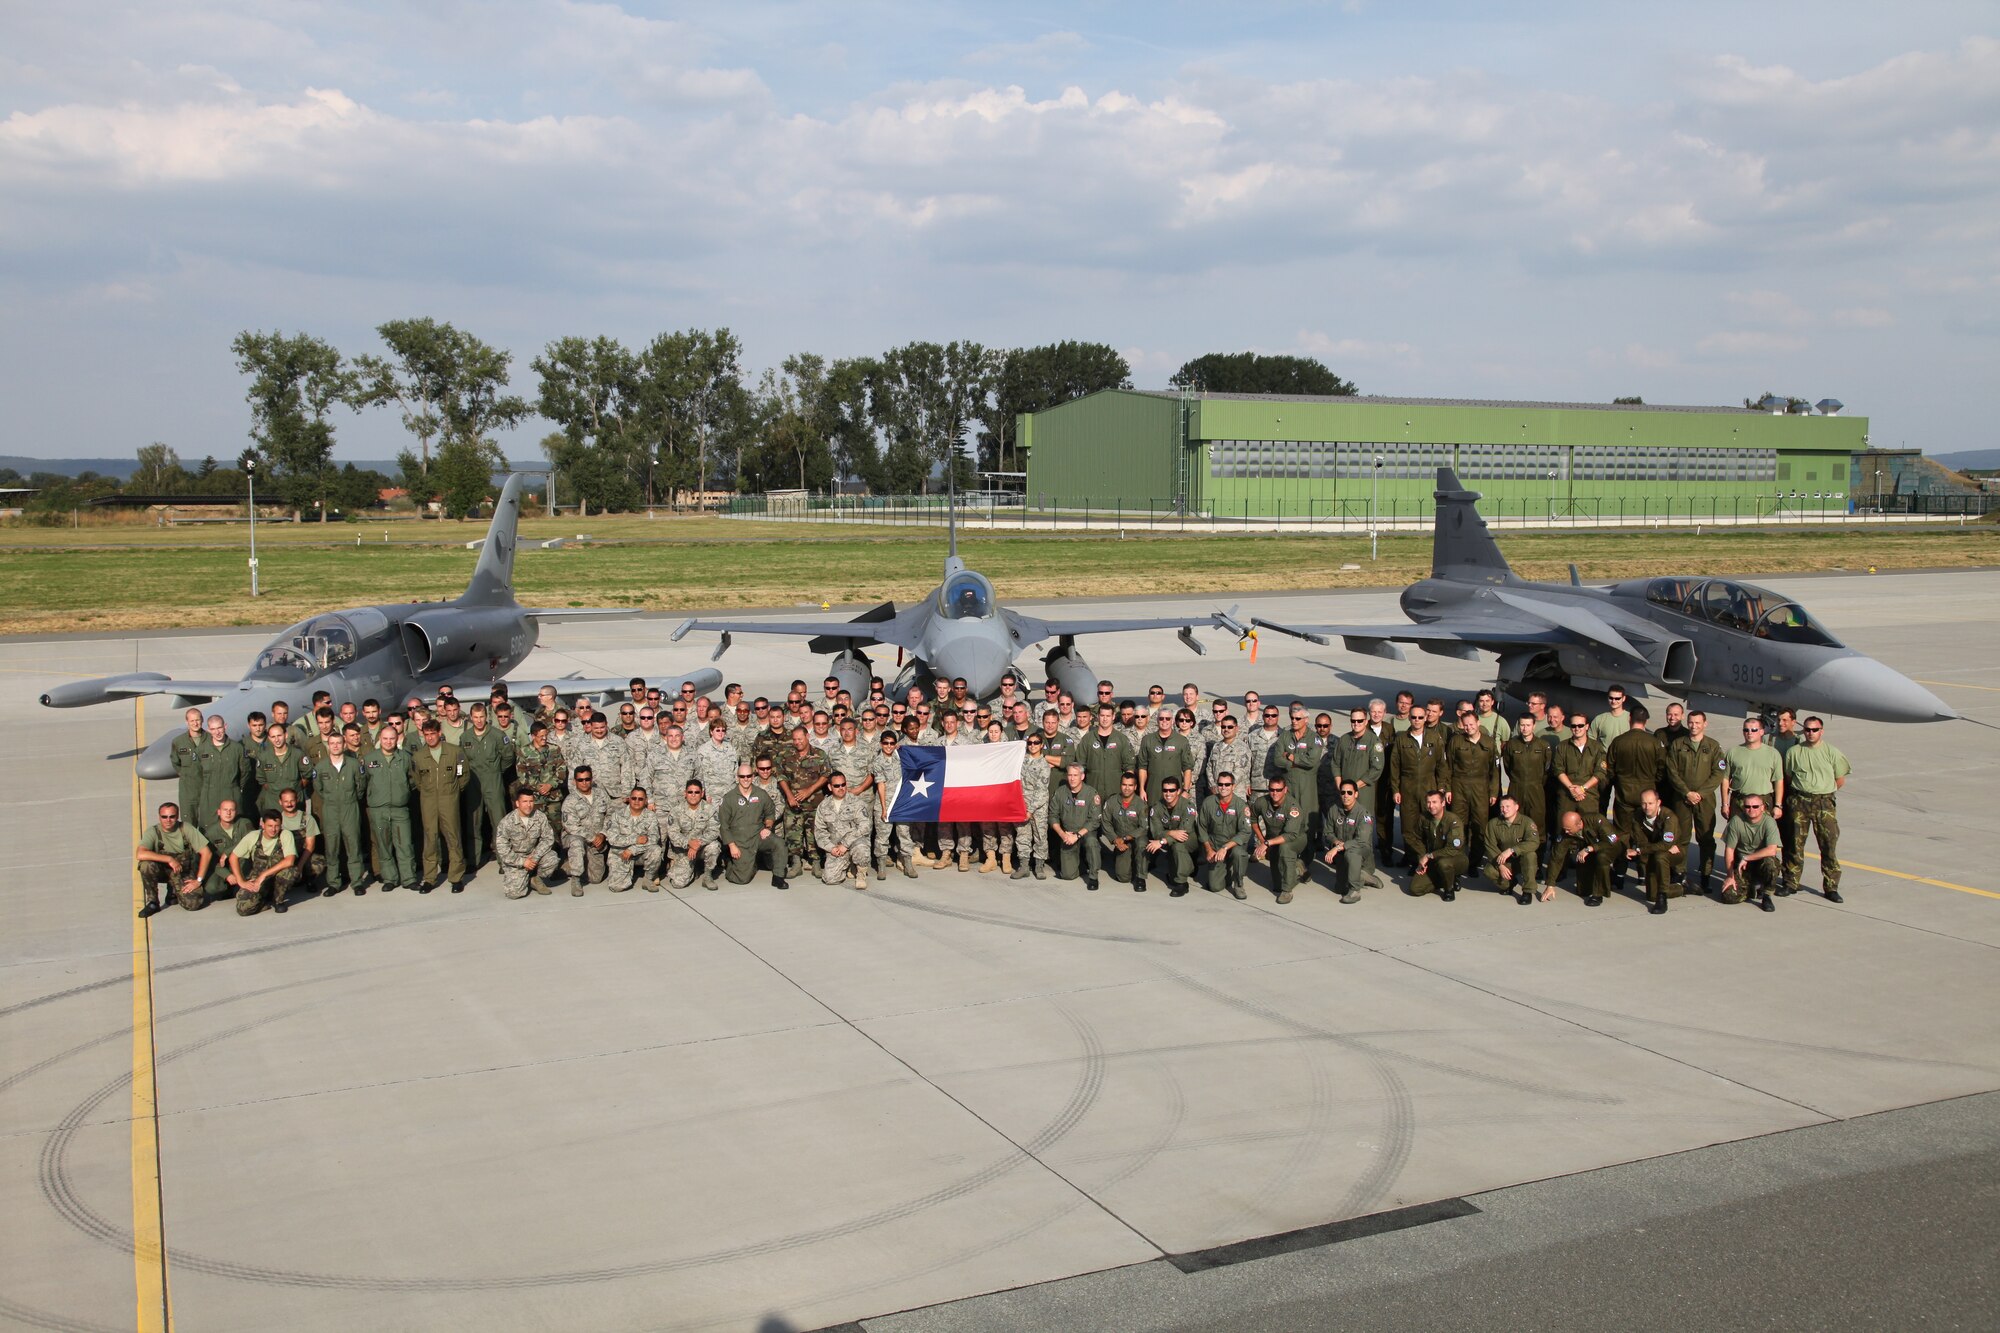 Czech and American forces pose together for a photo in front of an F-16 and Czech Grippen and Alca. Members of the Texas Air National Guard’s 149th Fighter Wing were in the Czech Republic conducting mutual training as part of the National Guard’s state partnership program.  (U.S. Air Force photo by Senior Master Sgt Miguel Arellano)